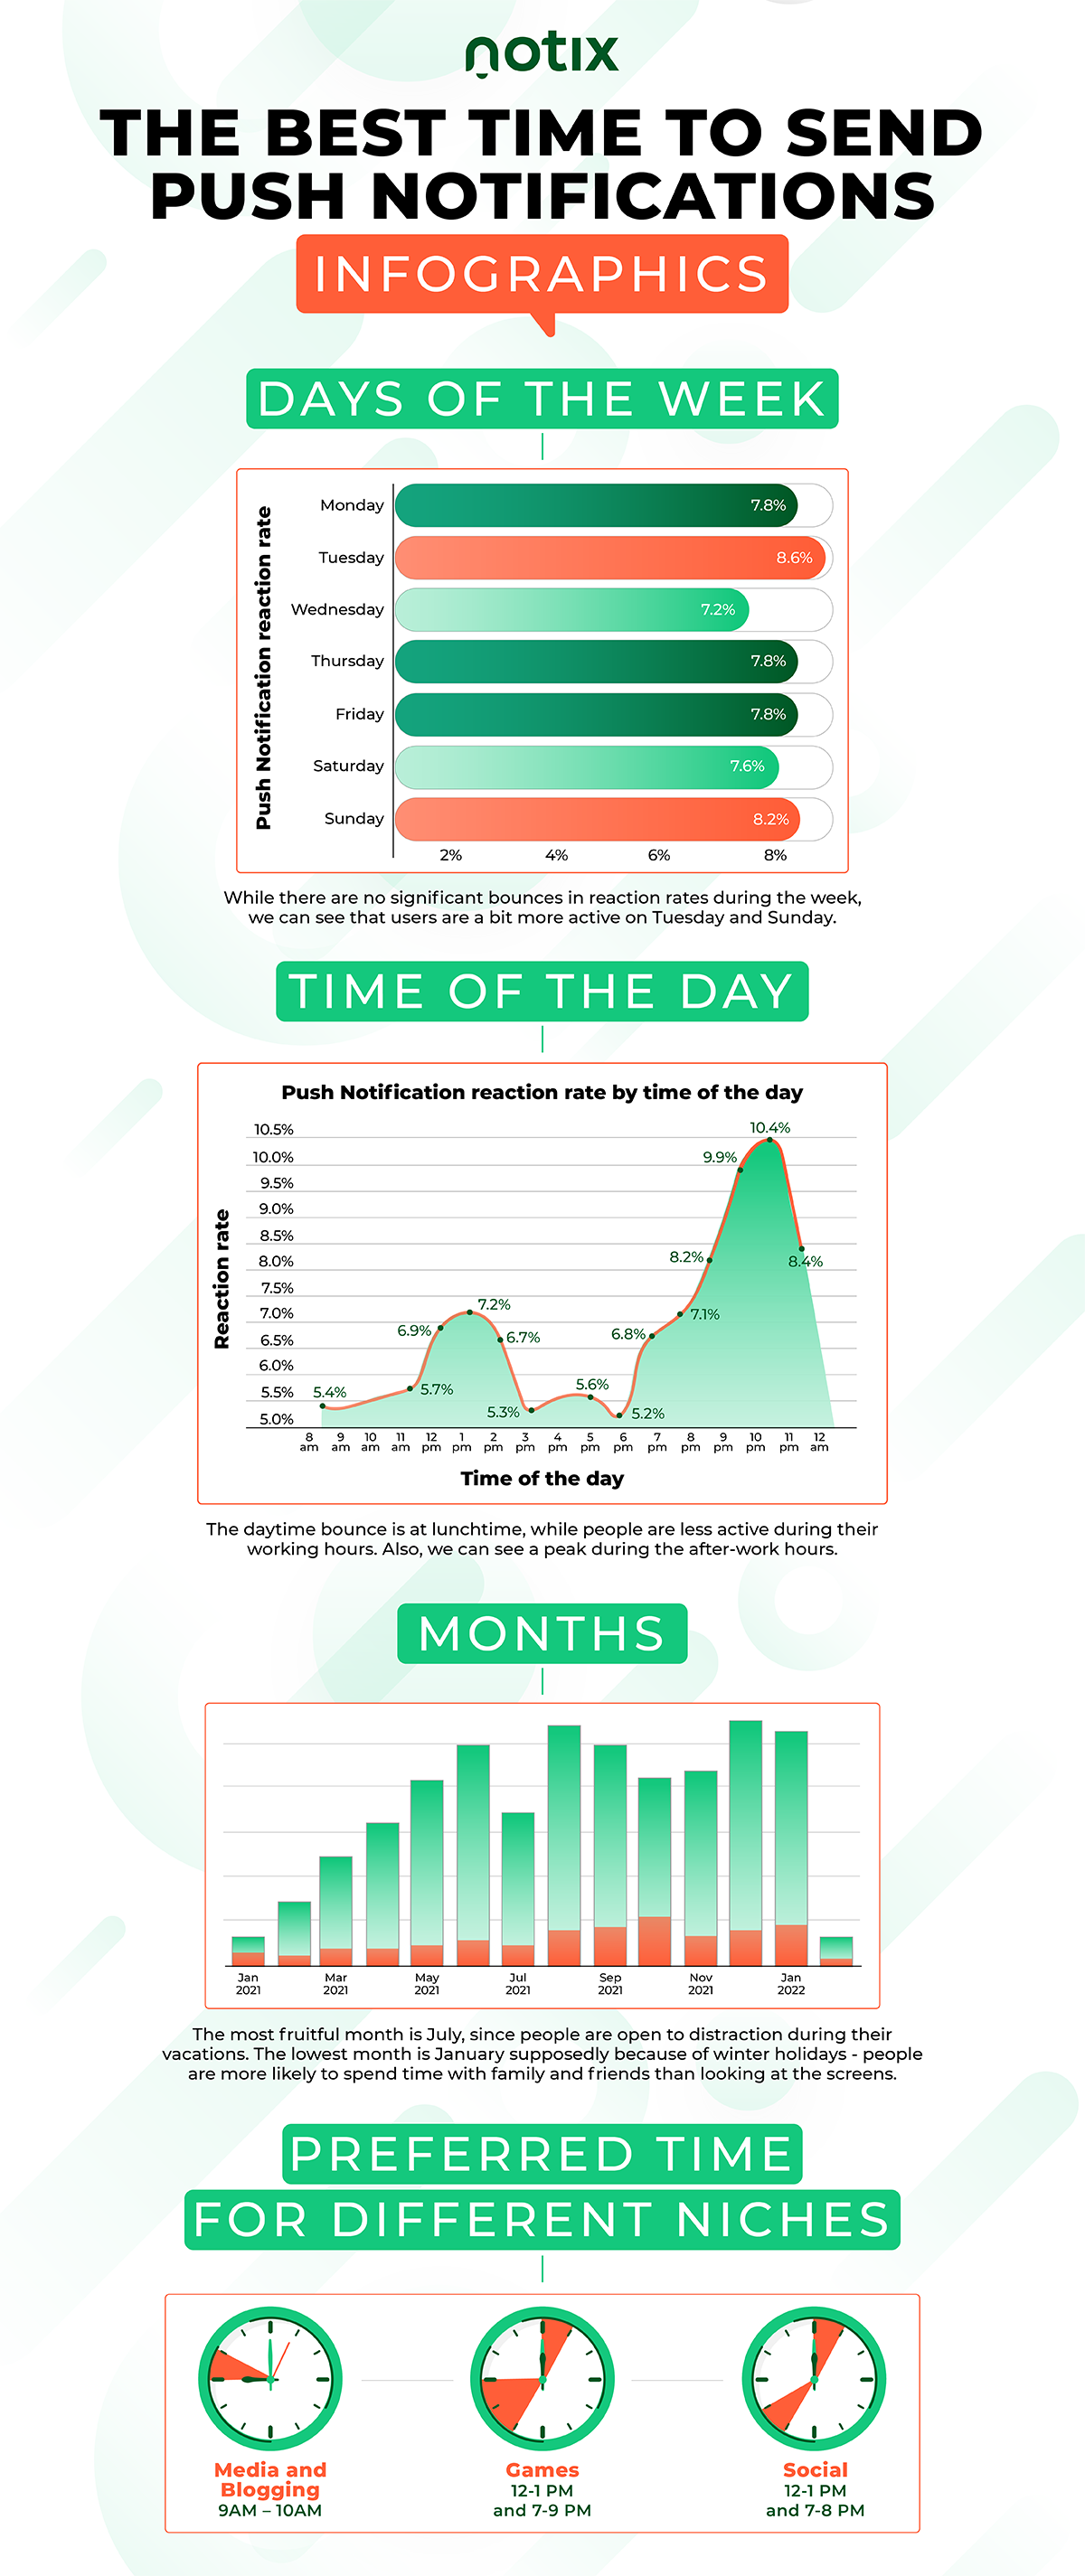 Notix_The_Best_Time_to_Send_Push_Notifications_Infographics